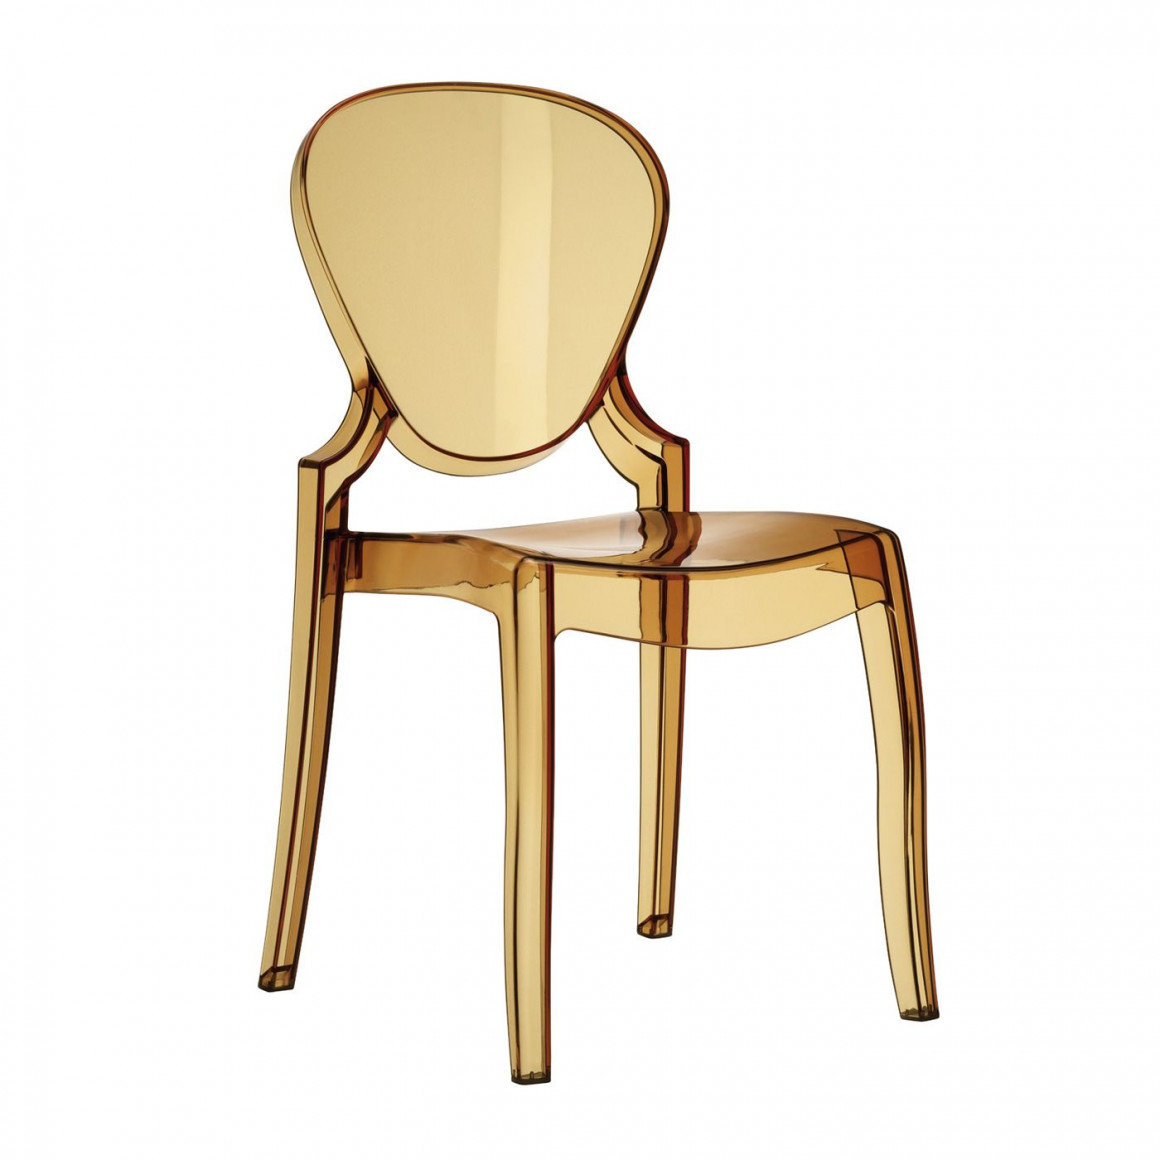 Chair QUEEN, amber polycarbonate